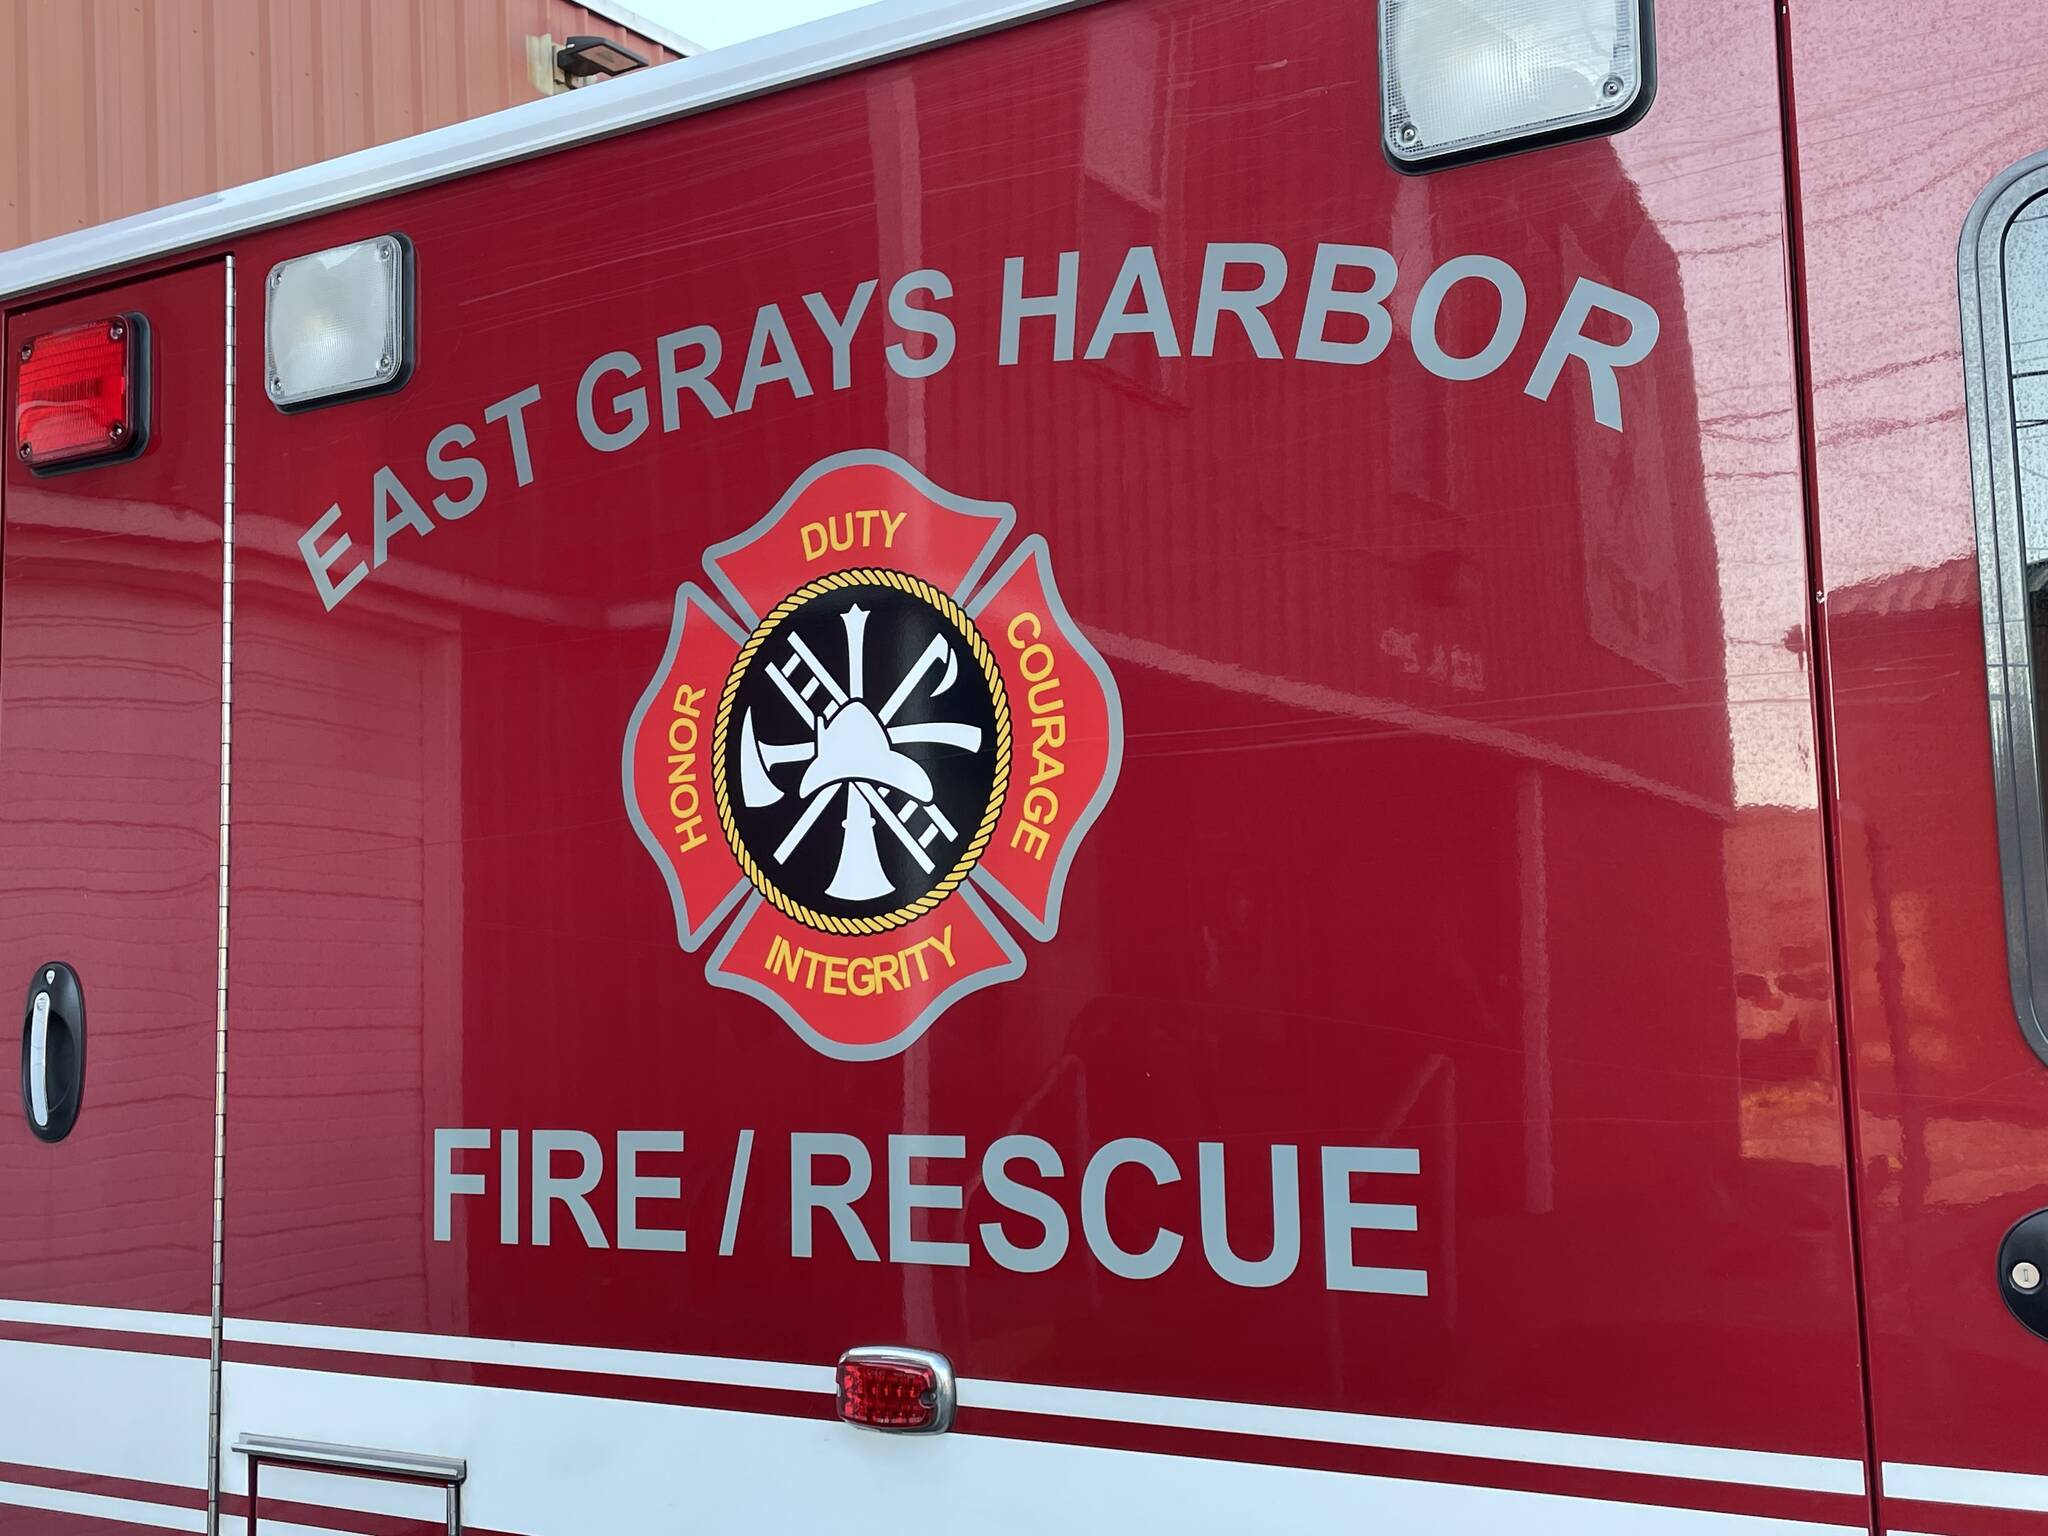 Members of East Grays Harbor Fire and Rescue medevac’d a man seriously injured in an explosion near Elma on the evening of Feb. 14. (Michael S. Lockett / The Daily World File)